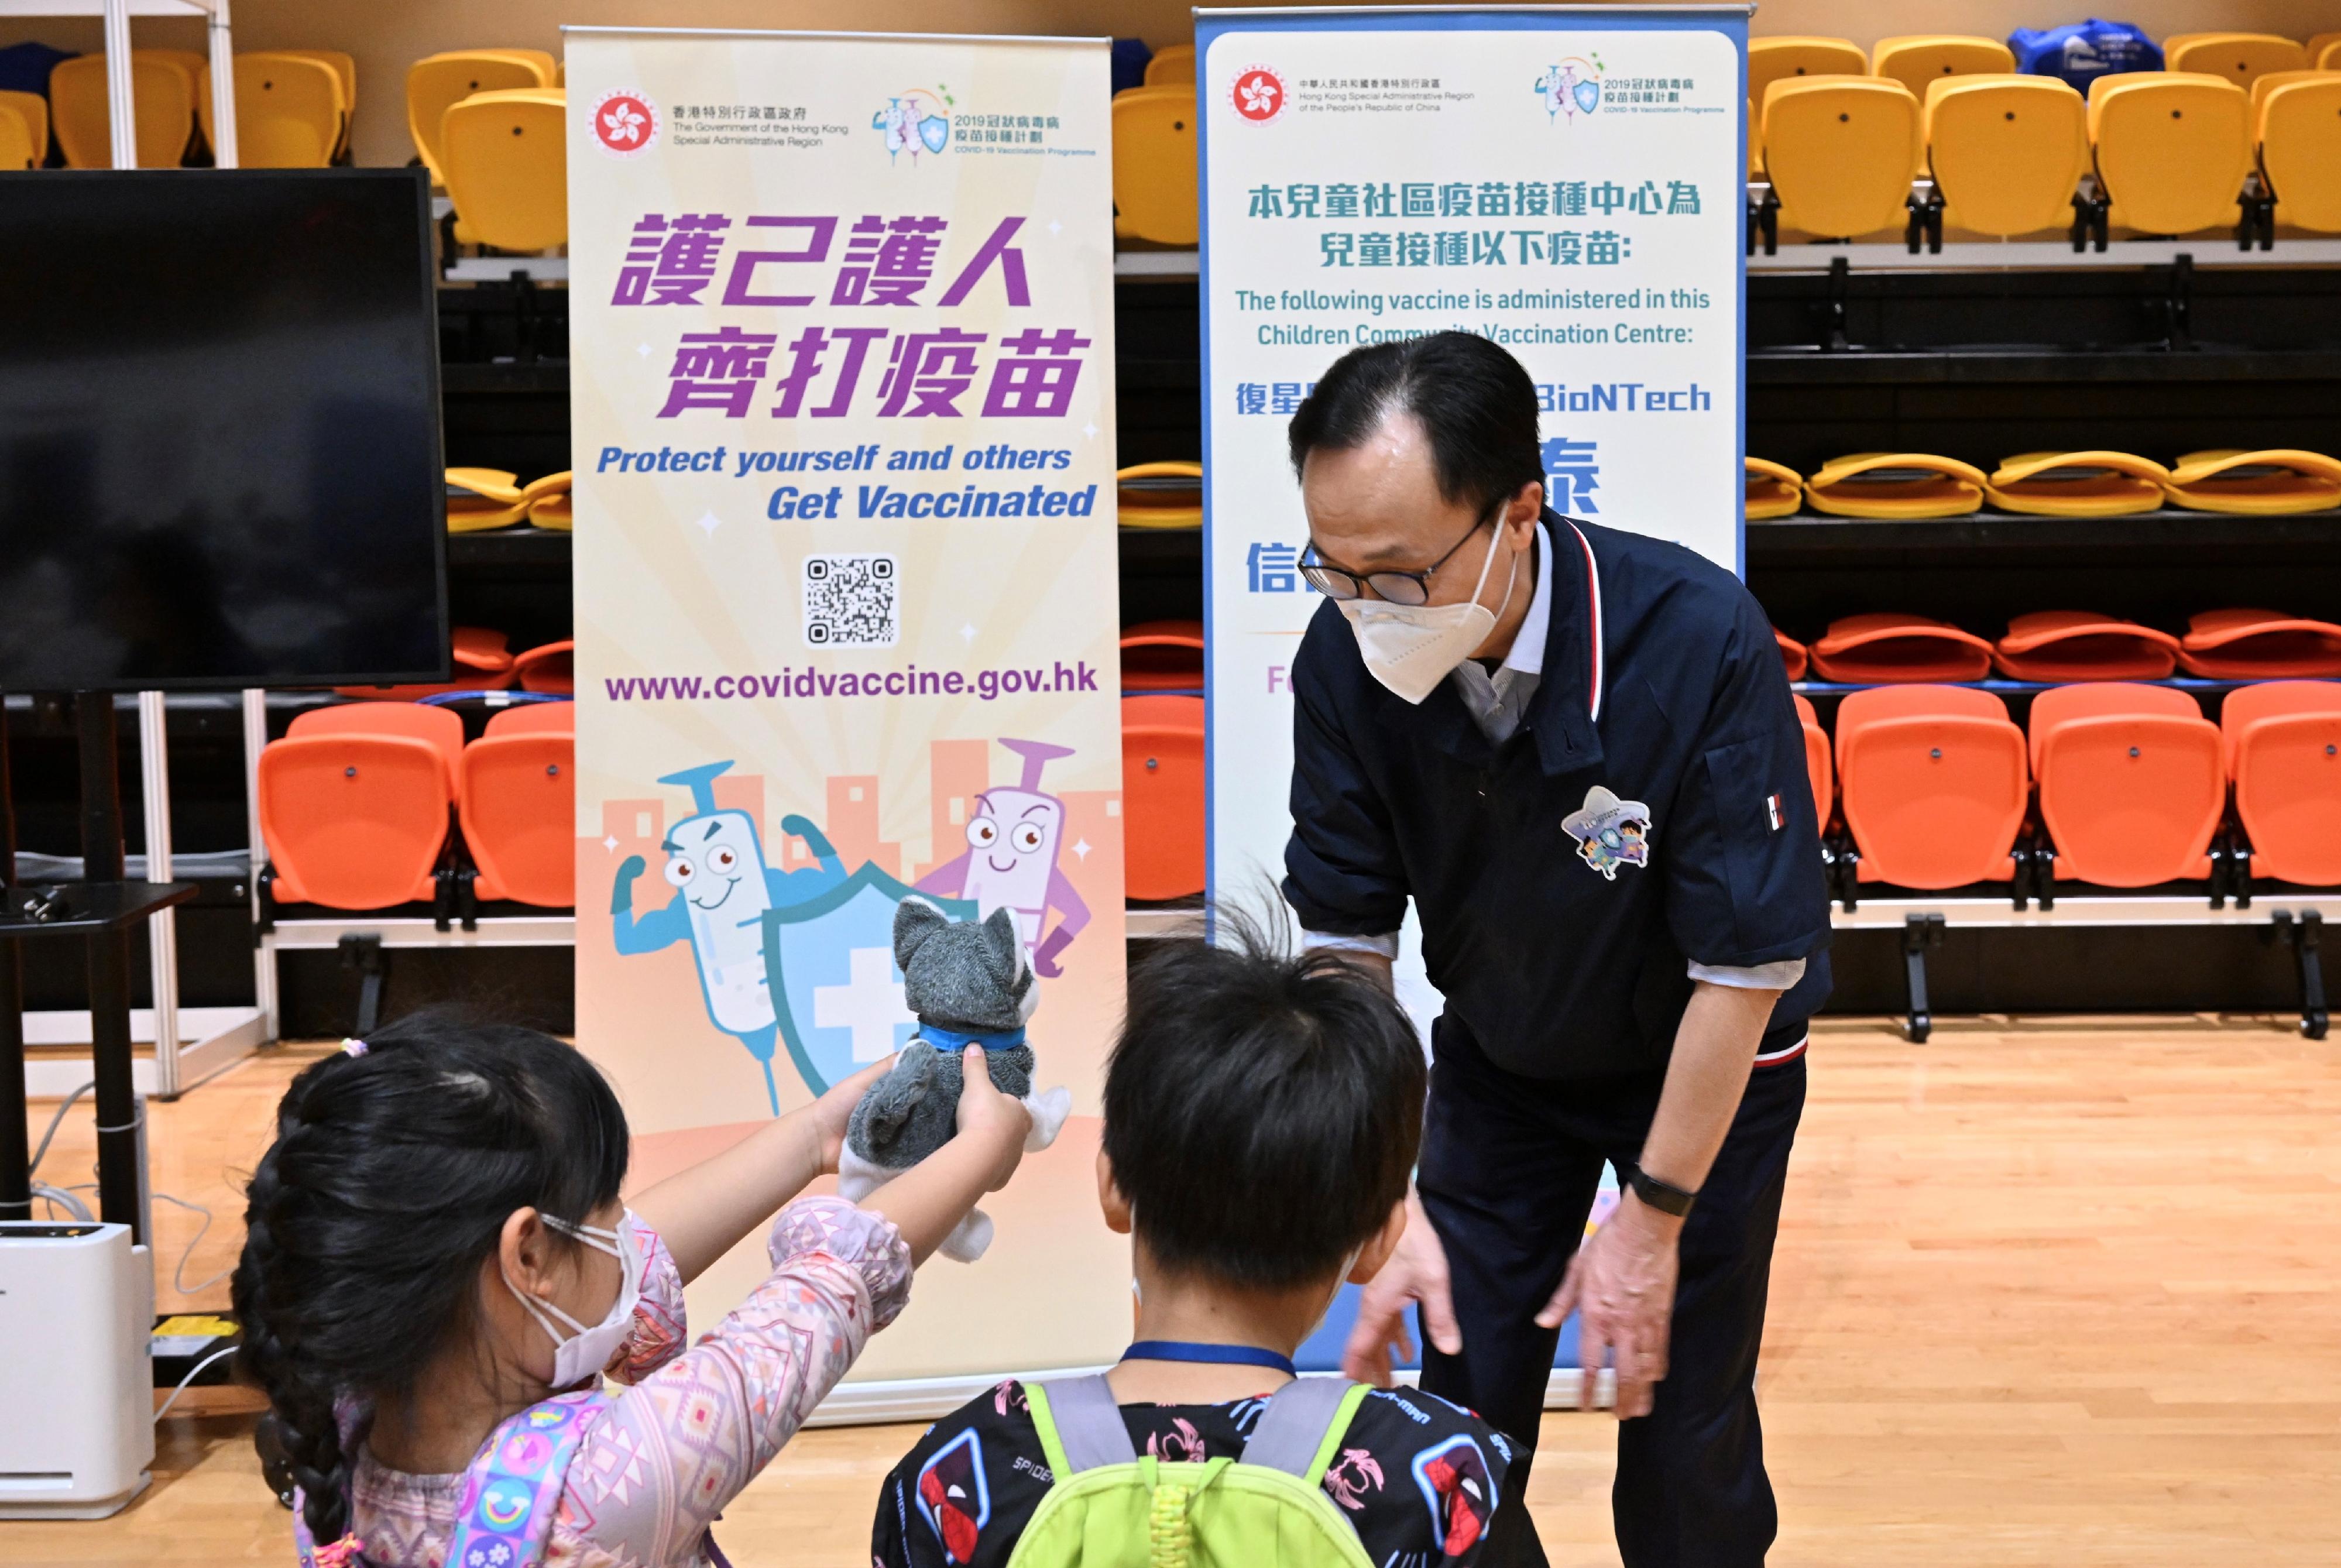 The Children Community Vaccination Centre at Tsuen Wan Sports Centre came into operation today (March 4) to provide the BioNTech vaccination service to children aged 5 to 11. Photo shows the Secretary for the Civil Service, Mr Patrick Nip (right), chatting with two children who are waiting for vaccination. 